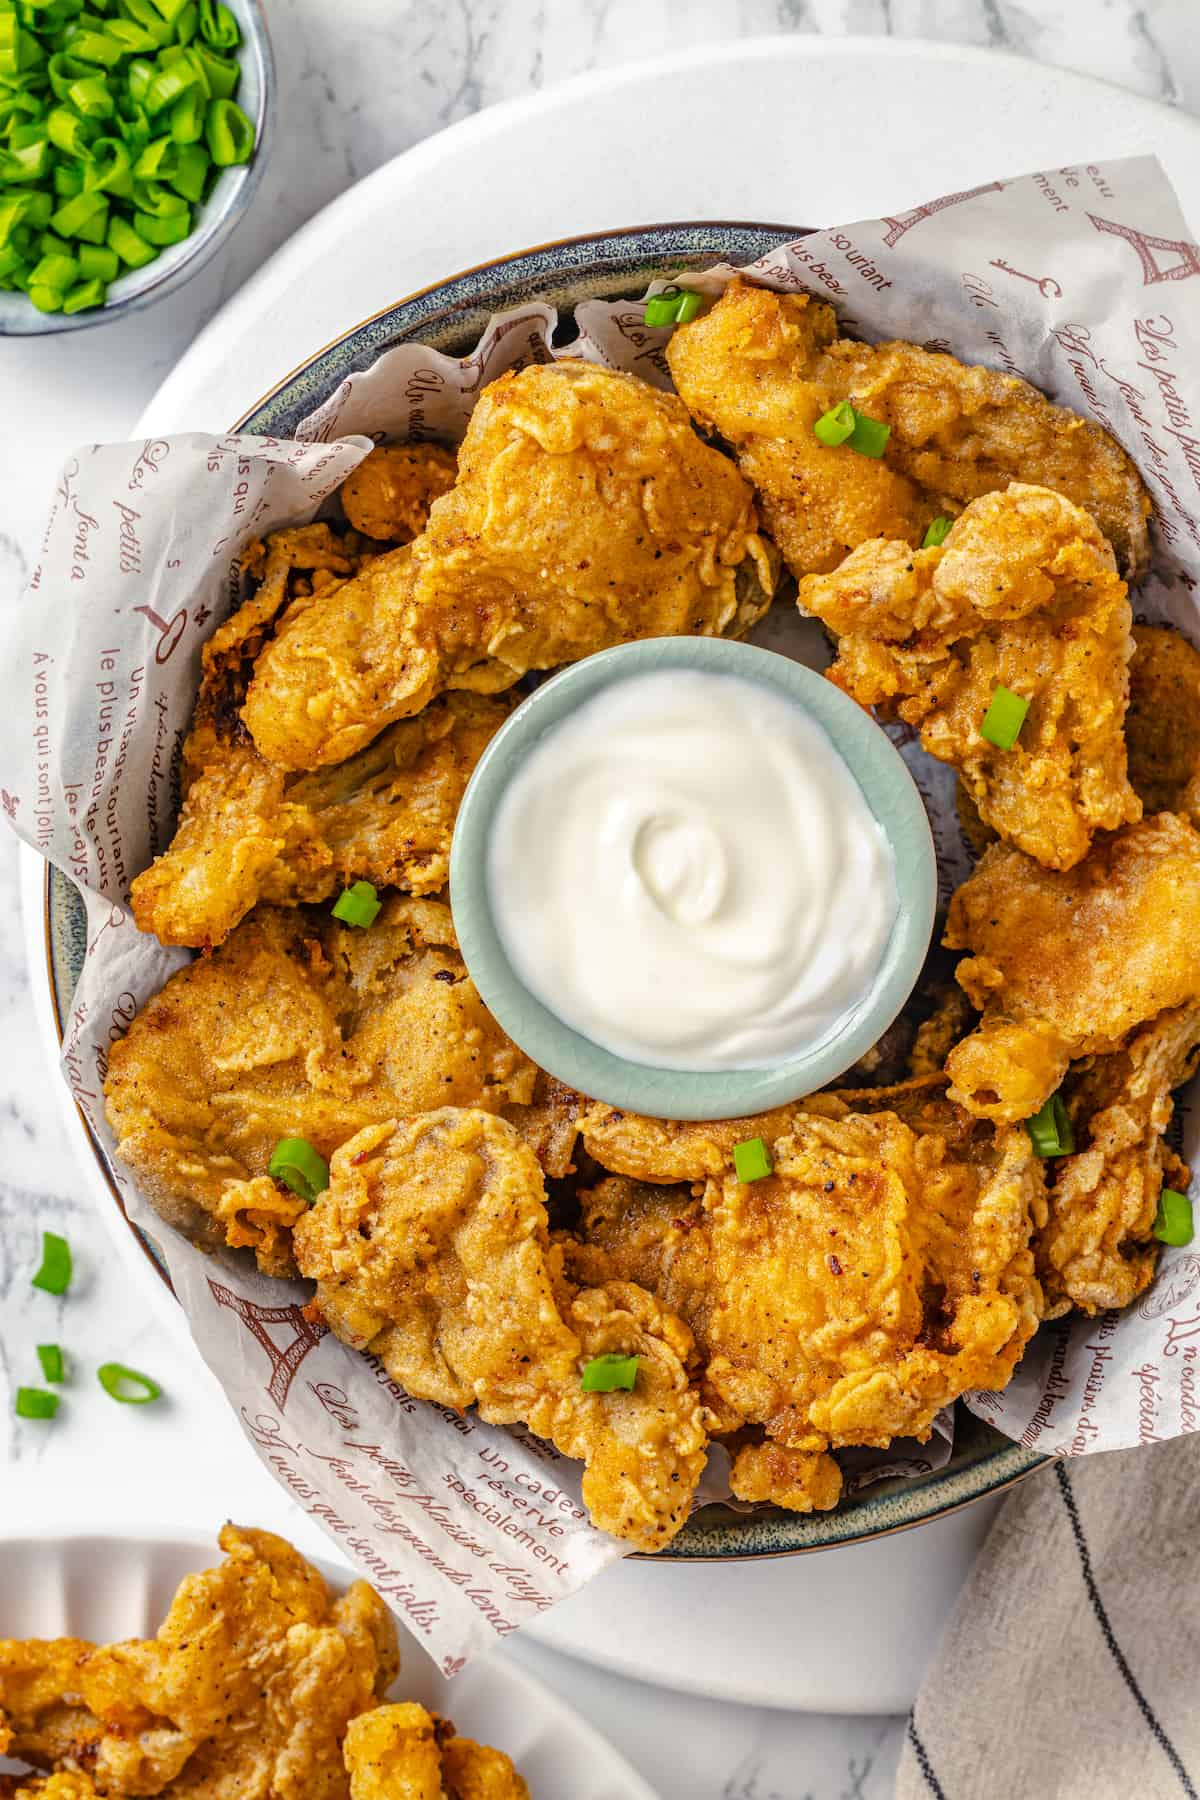 Overhead view of vegan fried chicken in bowl with creamy dipping sauce